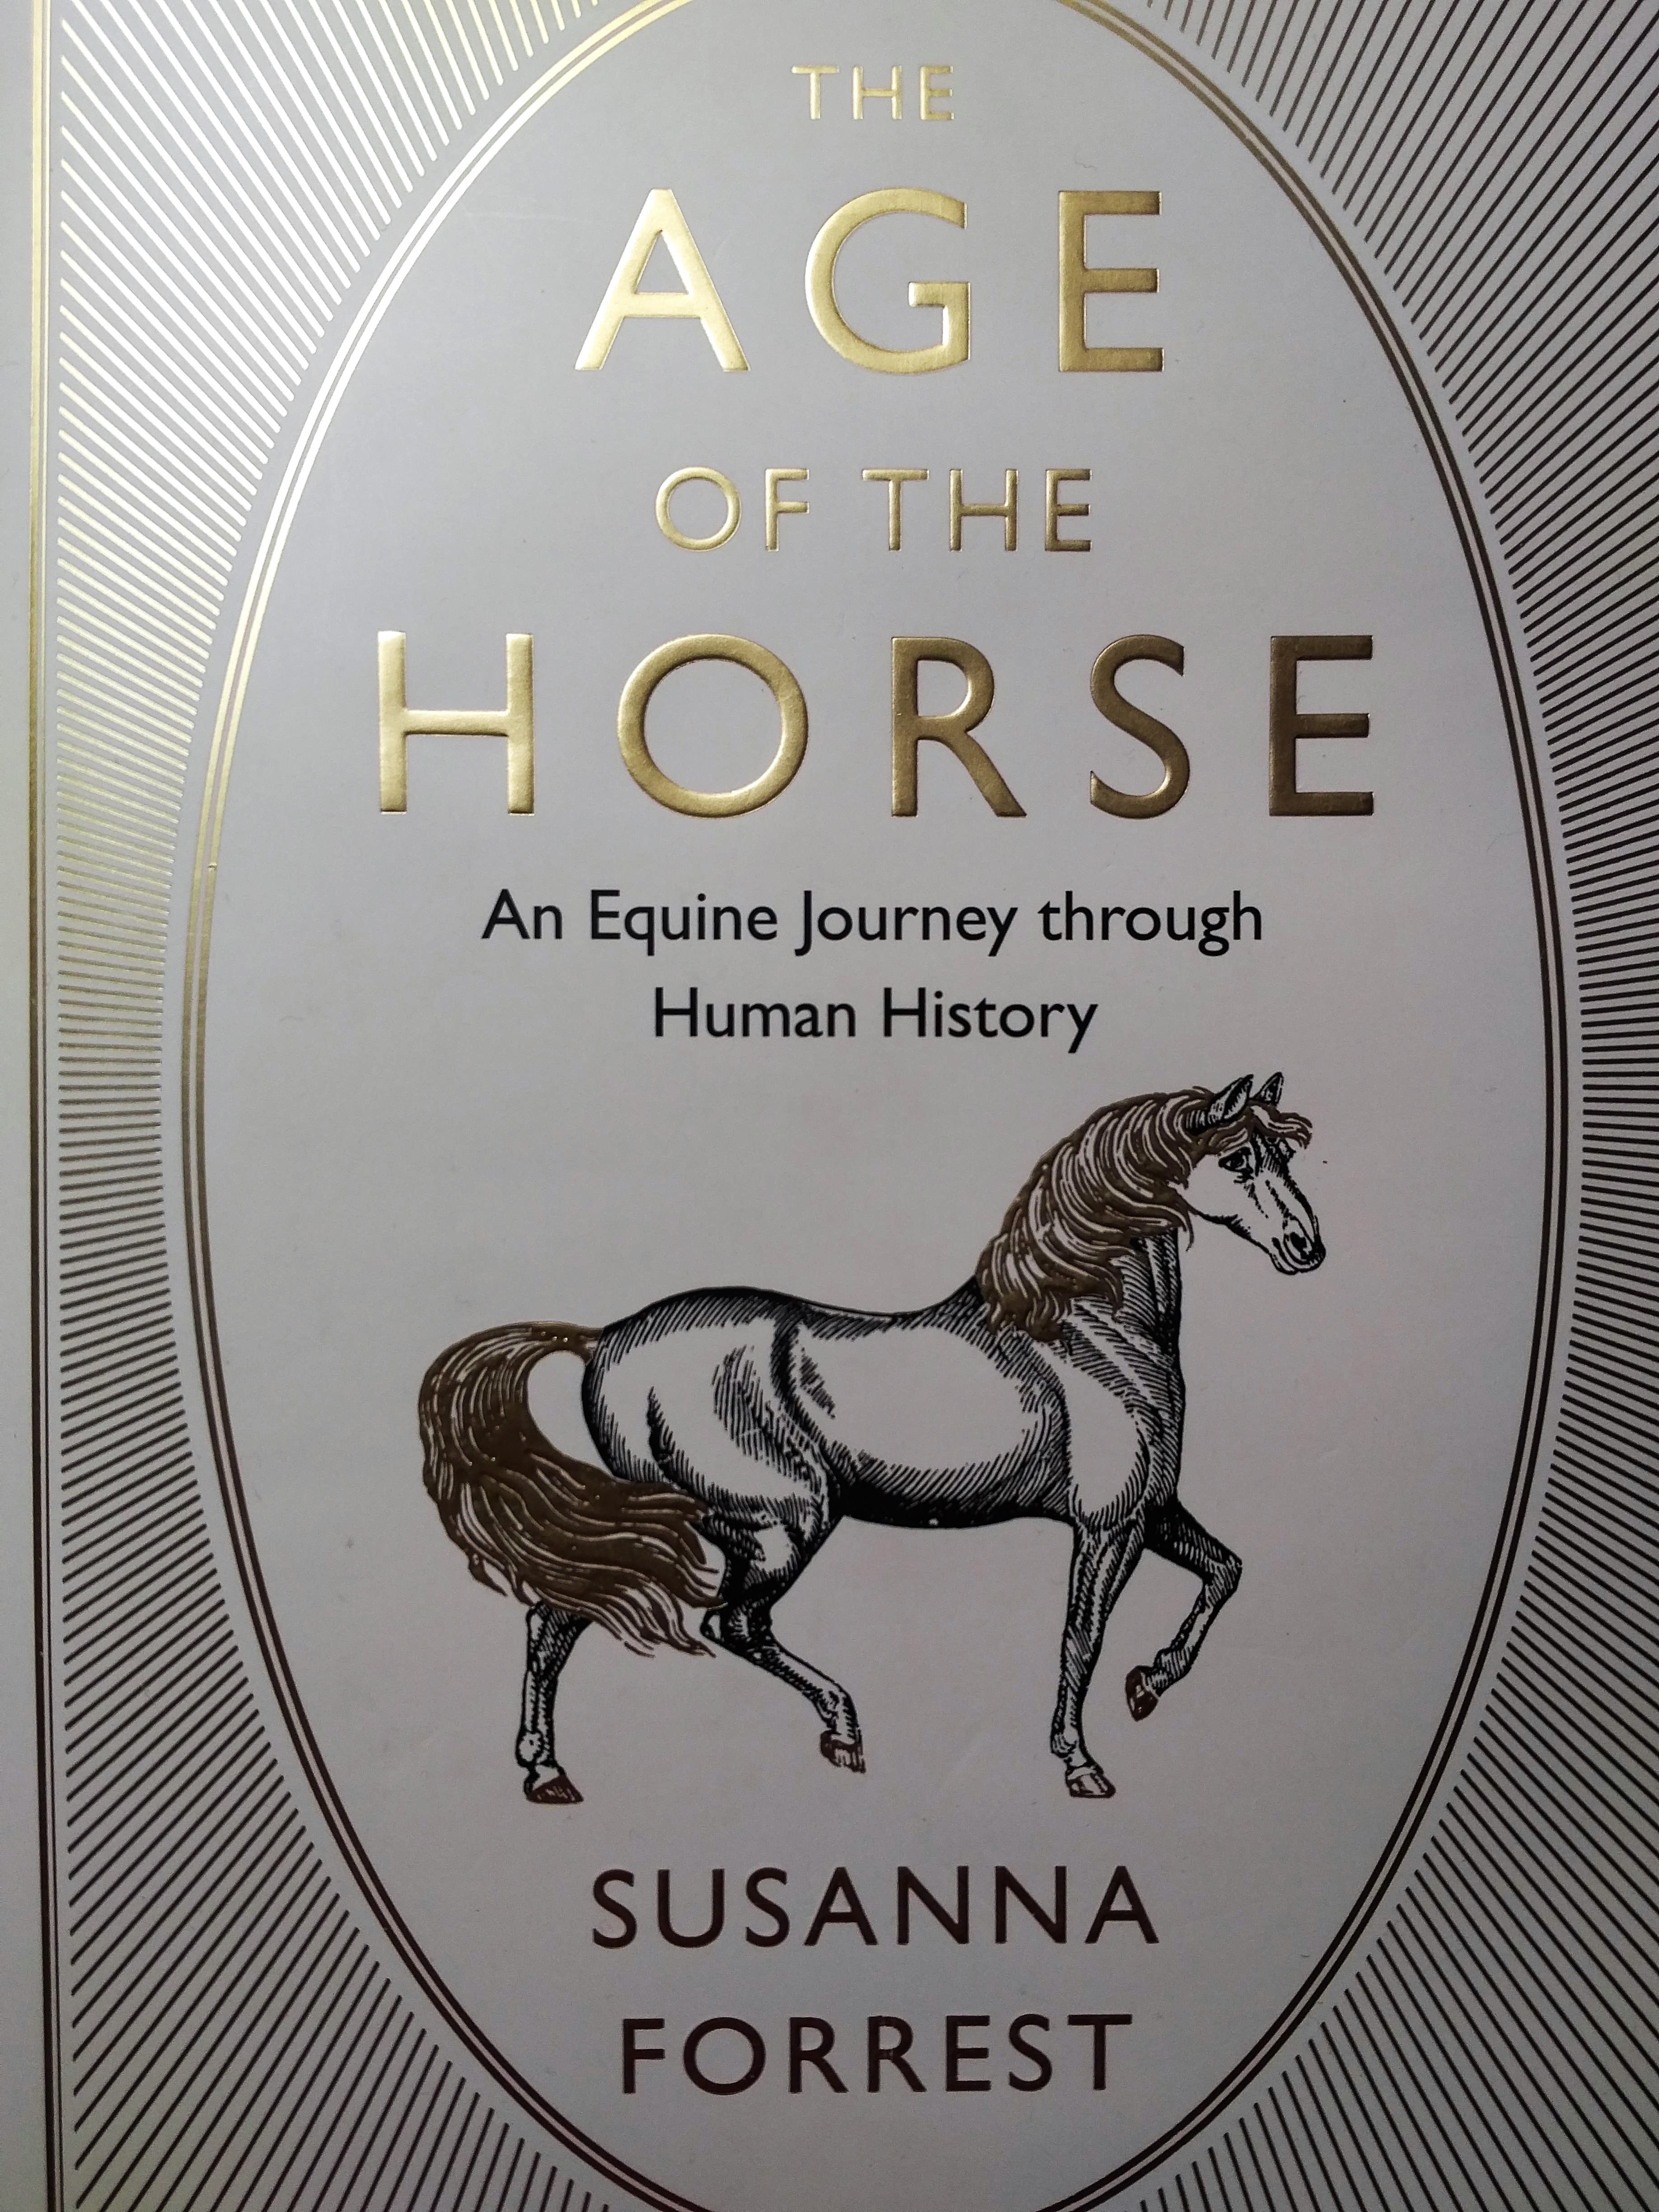 Book Review: The Age of the Horse-Susanna Forrest